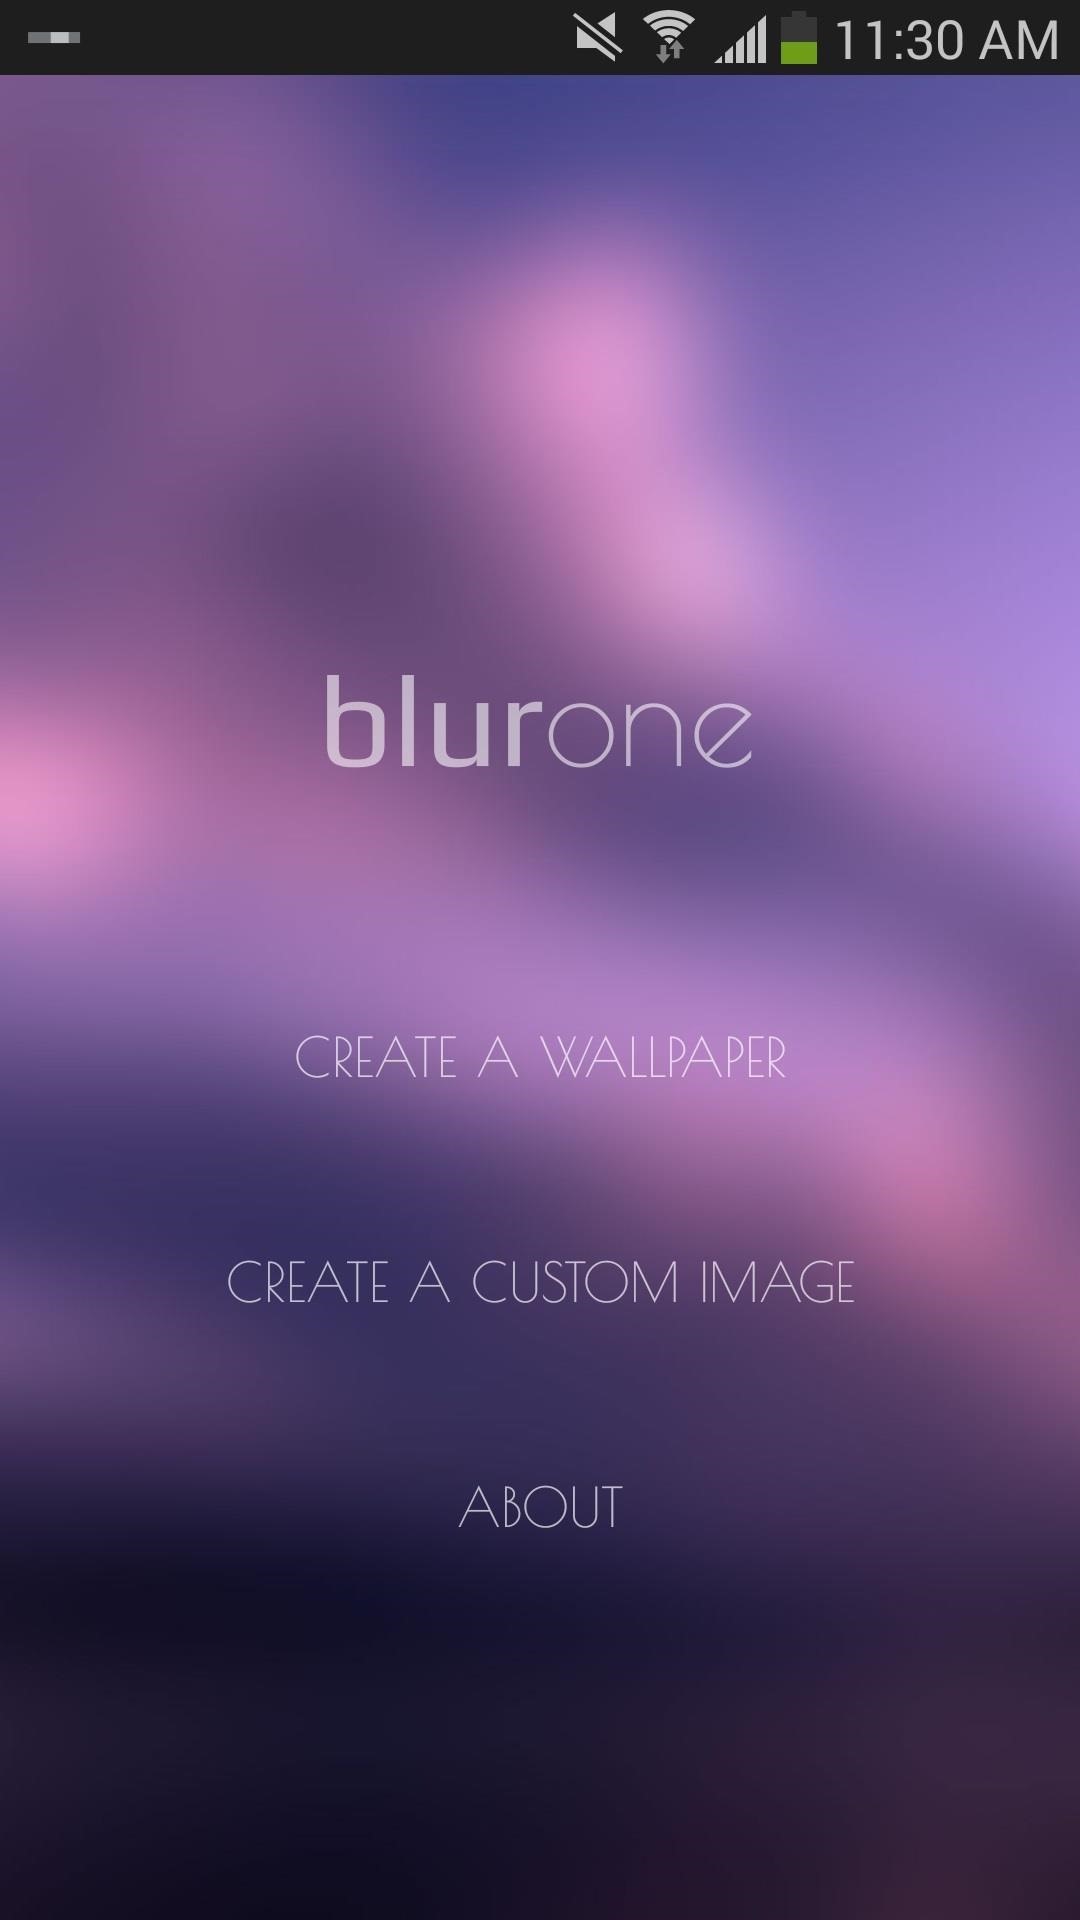 How To Add Ios 7-style Blur Effects To Backgrounds - Blurred Image Background Android - HD Wallpaper 